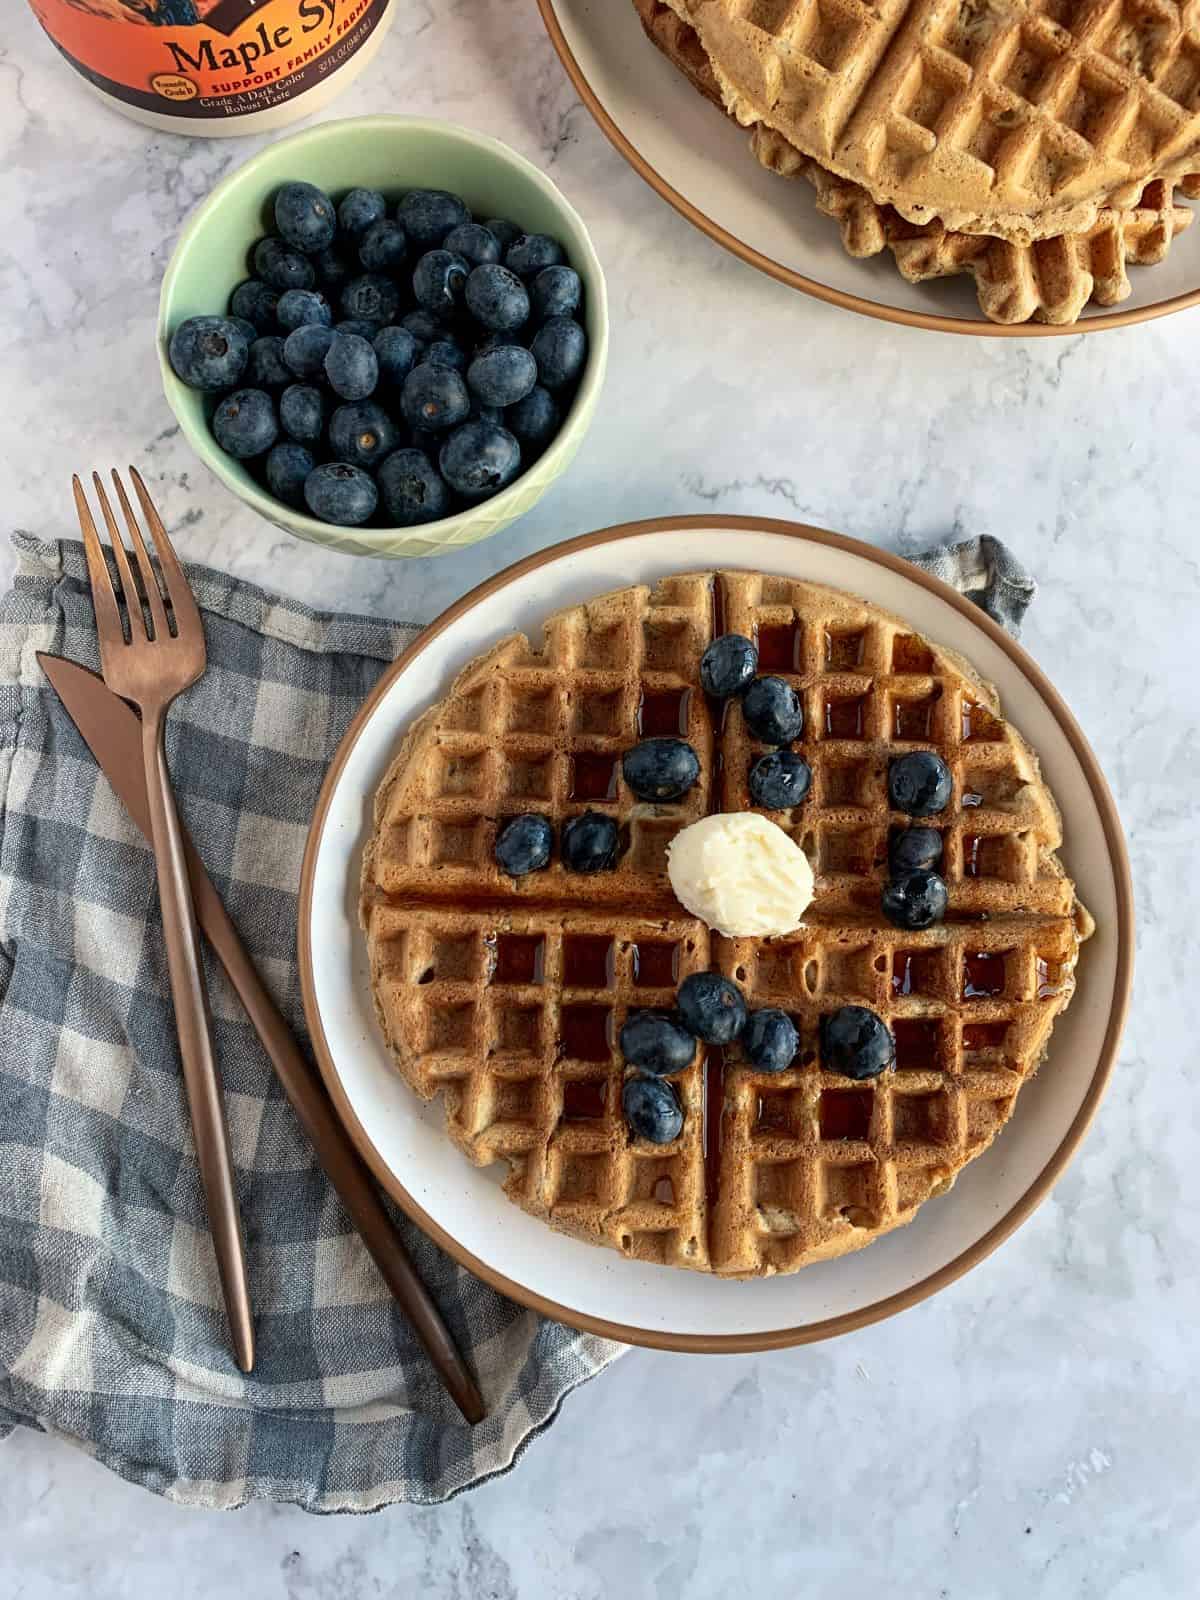 Oatmeal waffle on a white plate with blueberries, maple syrup and vegan butter.